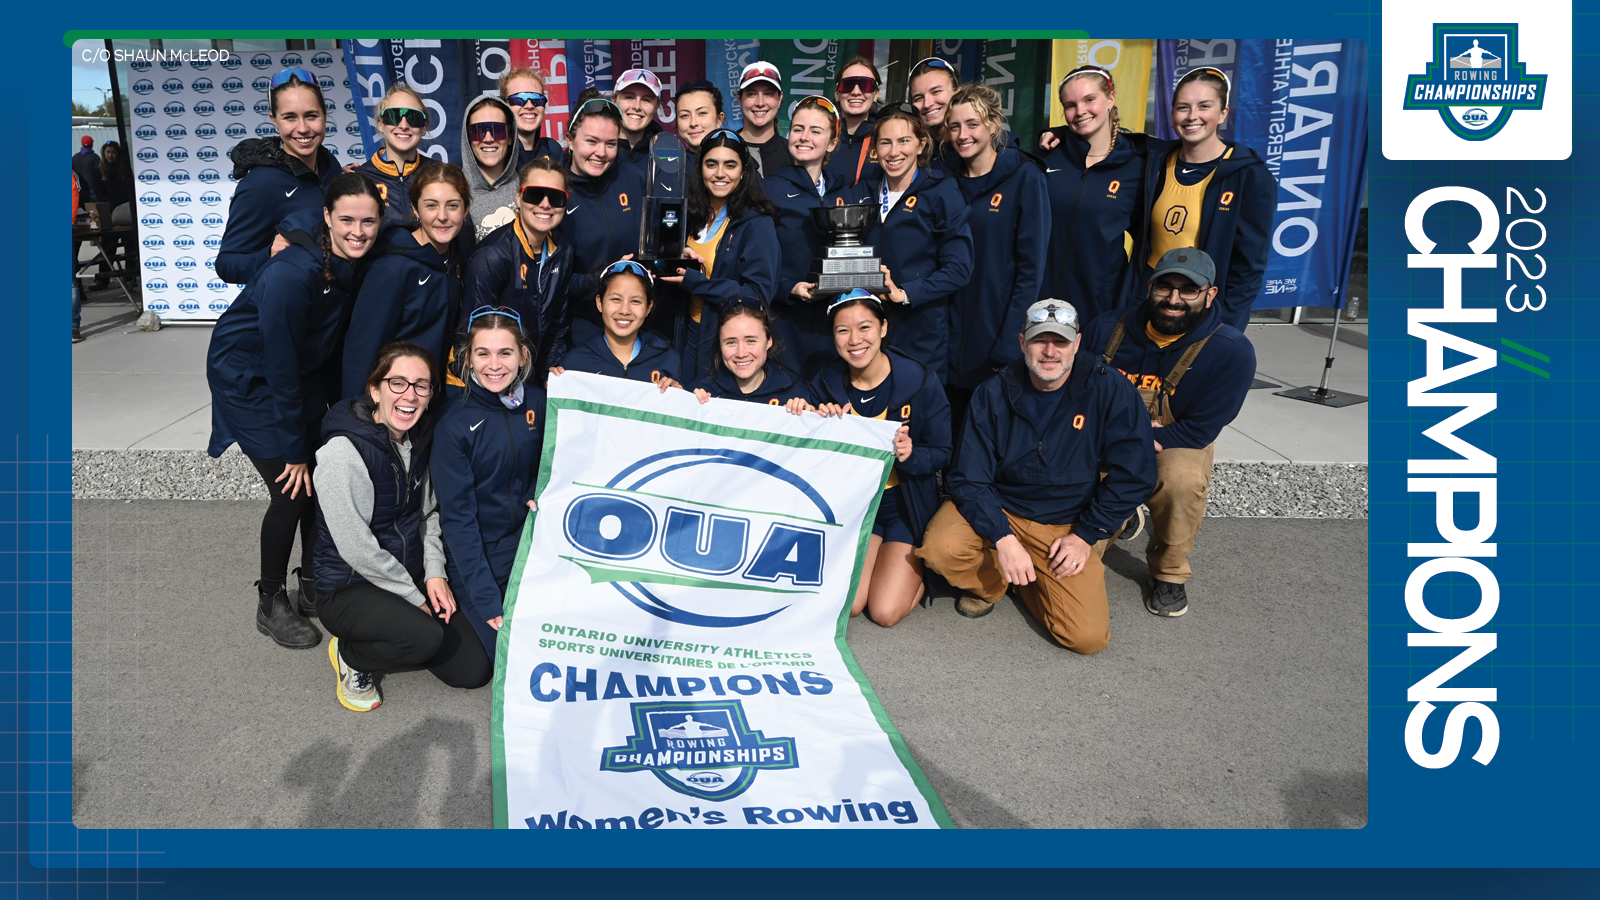 Predominantly blue graphic covered mostly by 2023 OUA Women's Rowing Championship banner photo, with the corresponding championship logo and white text reading '2023 Champions' on the right side